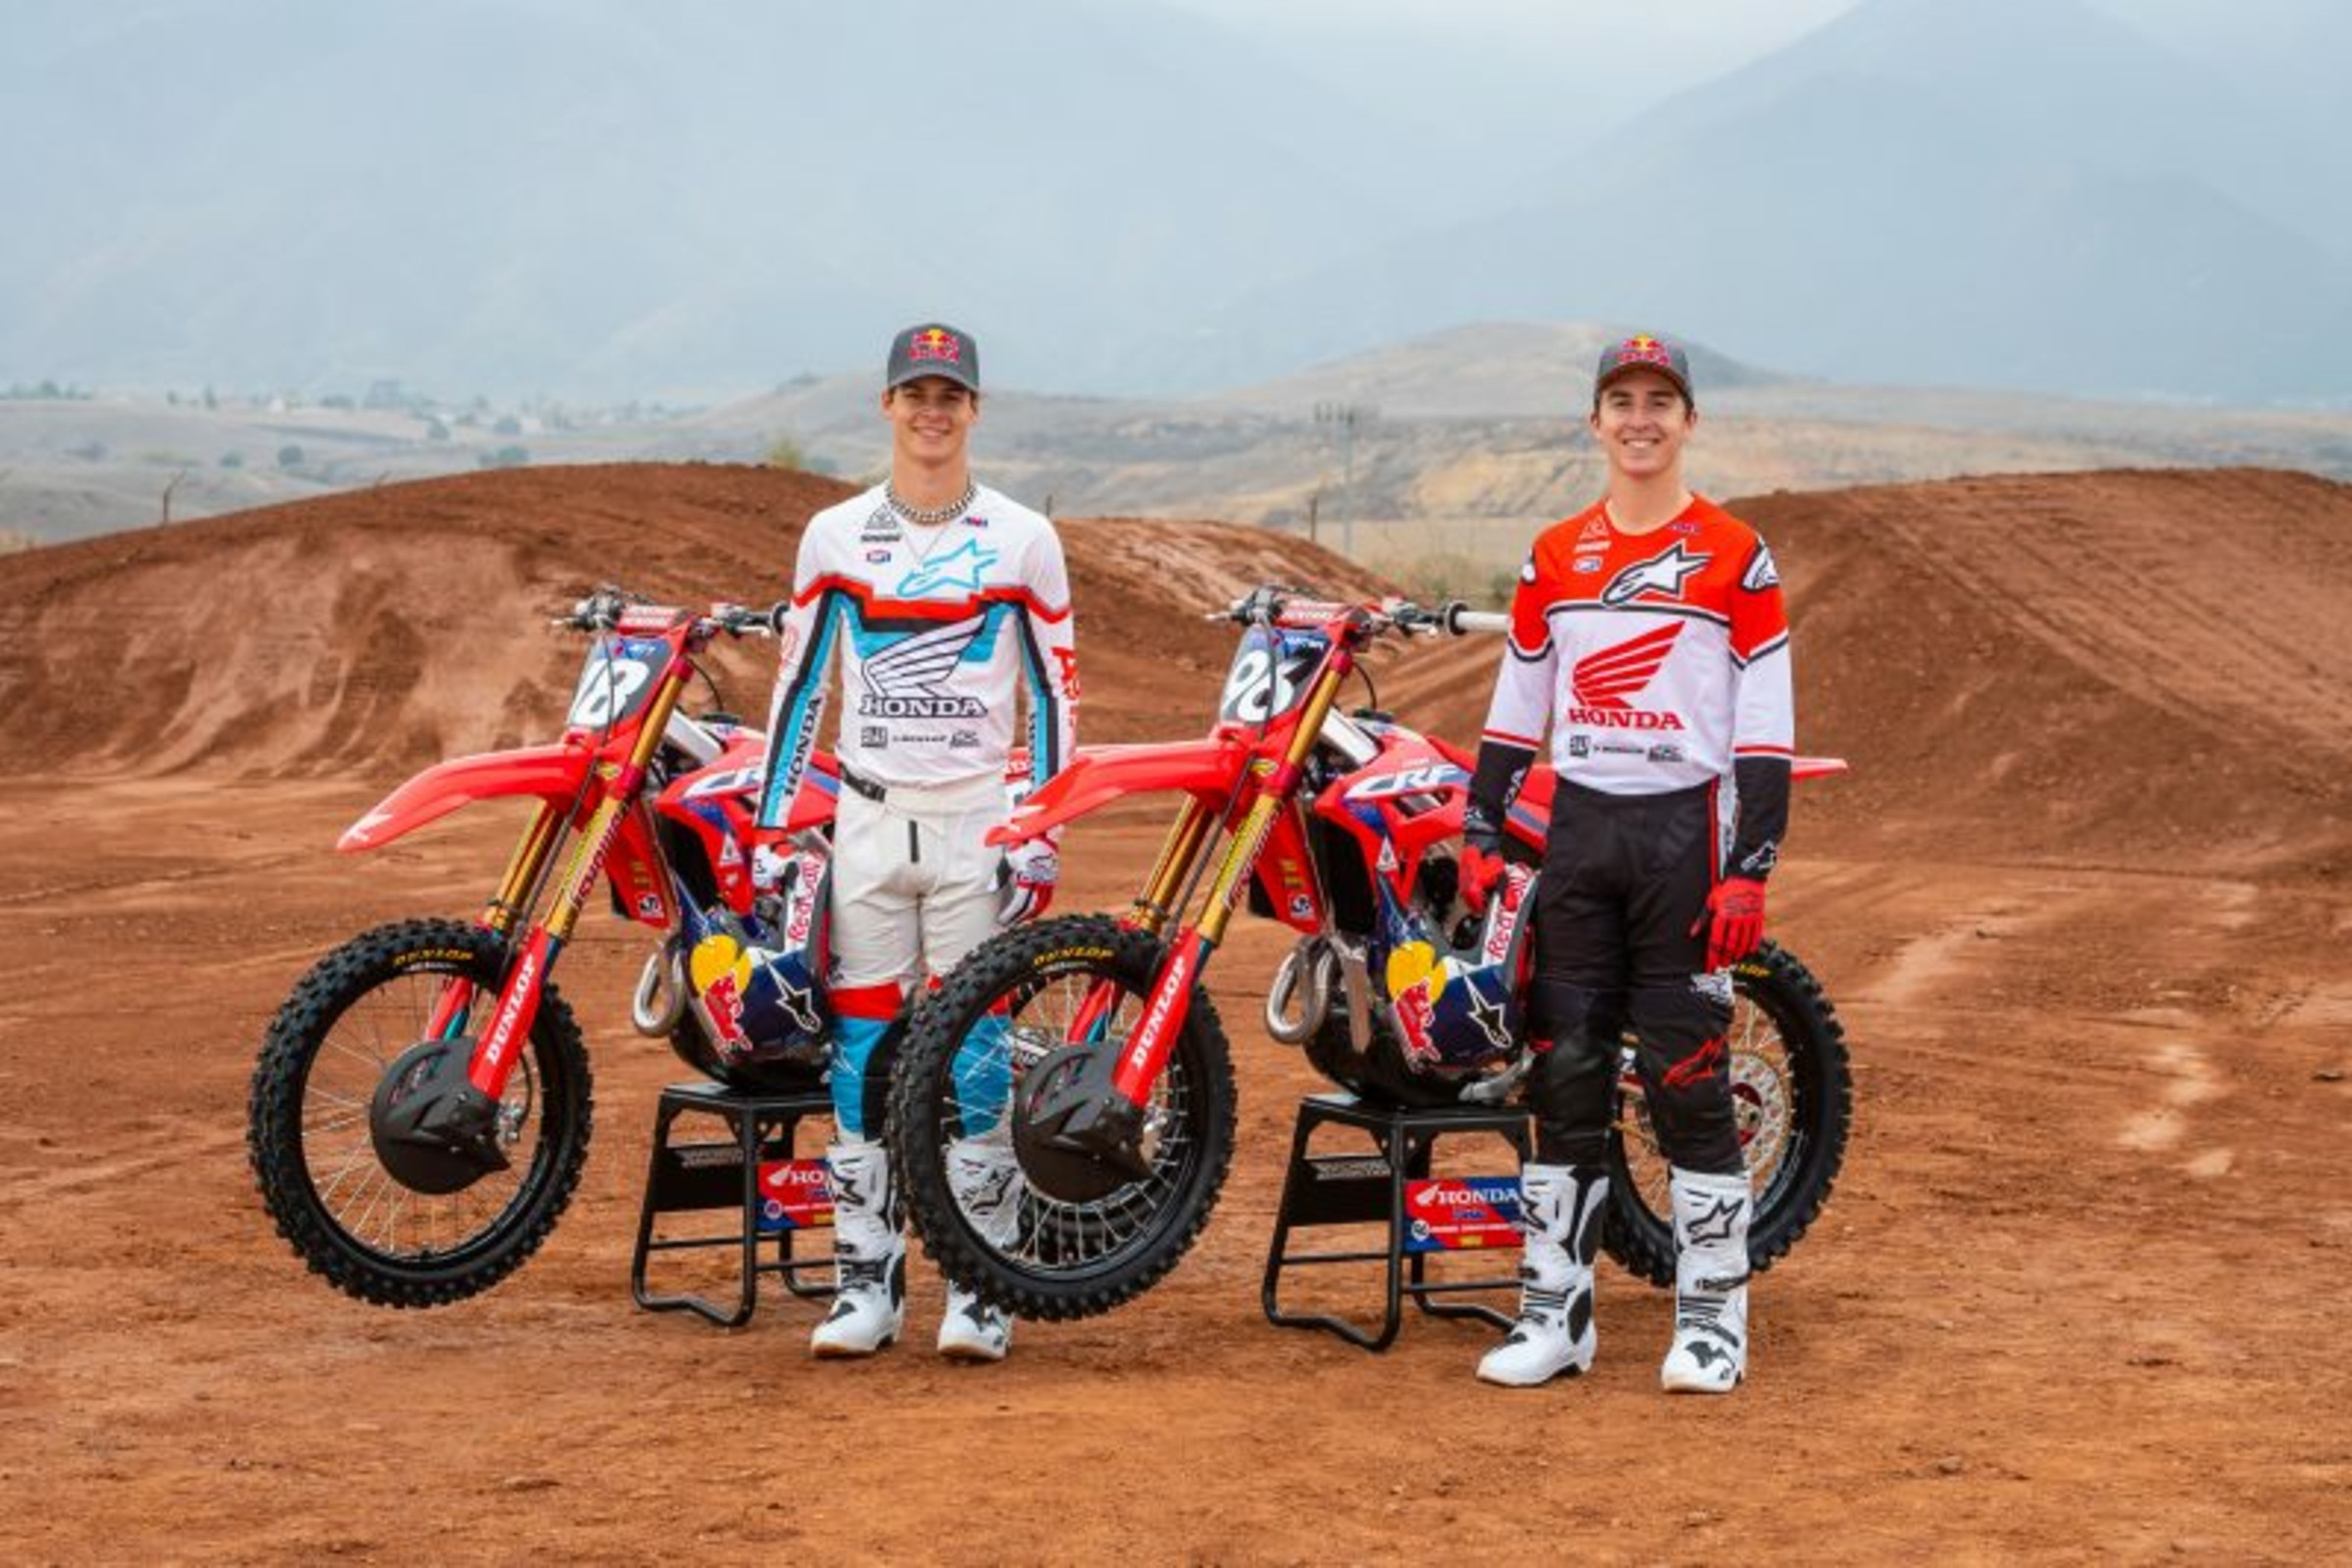 Lawrence Brothers to Trade AMA Supercross 250SX Regions